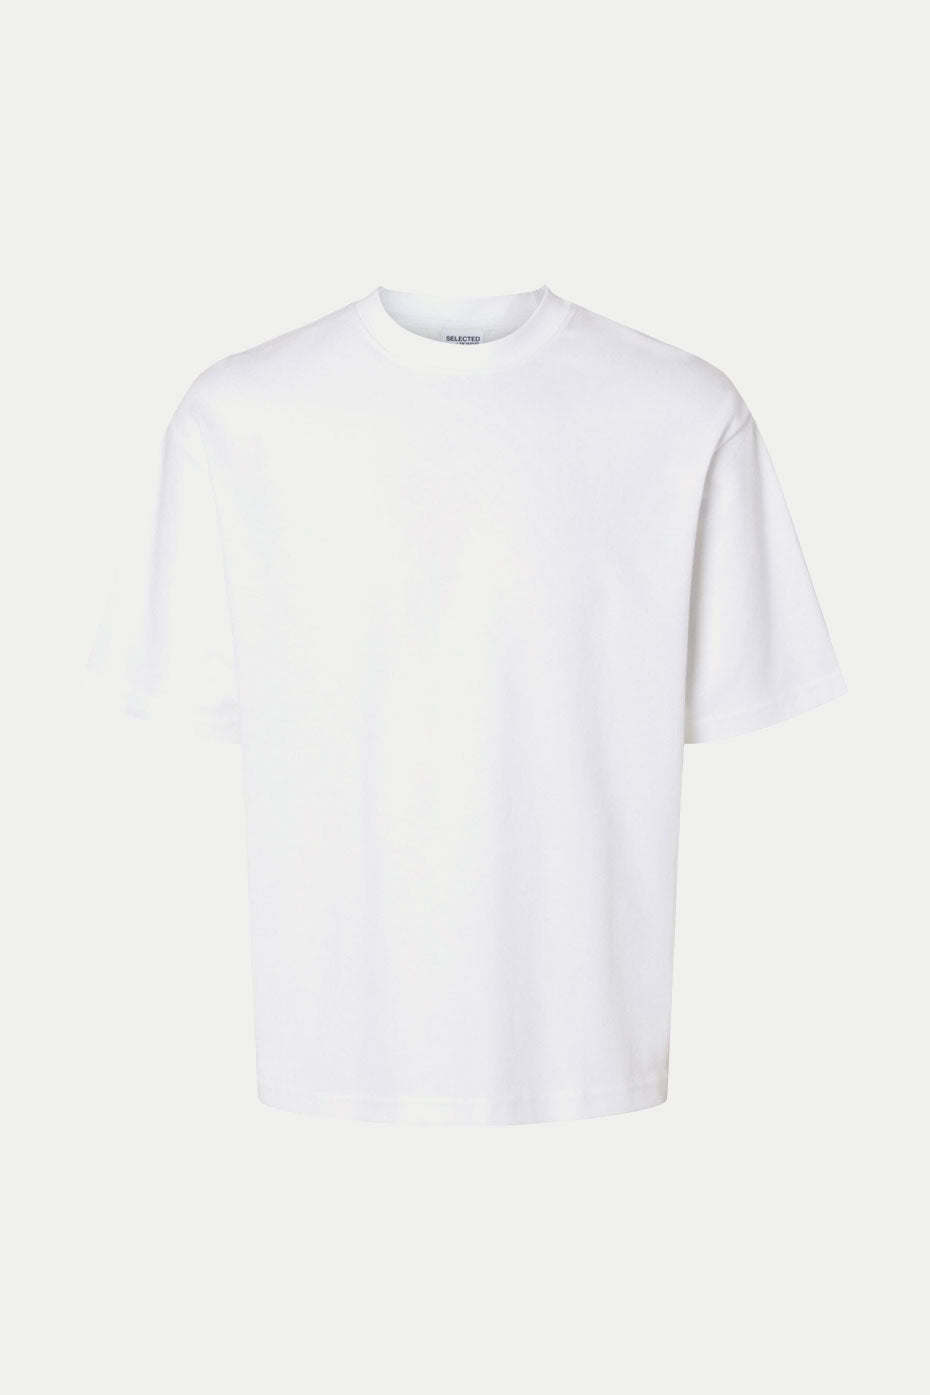 selected-homme-white-relax-oscar-tee